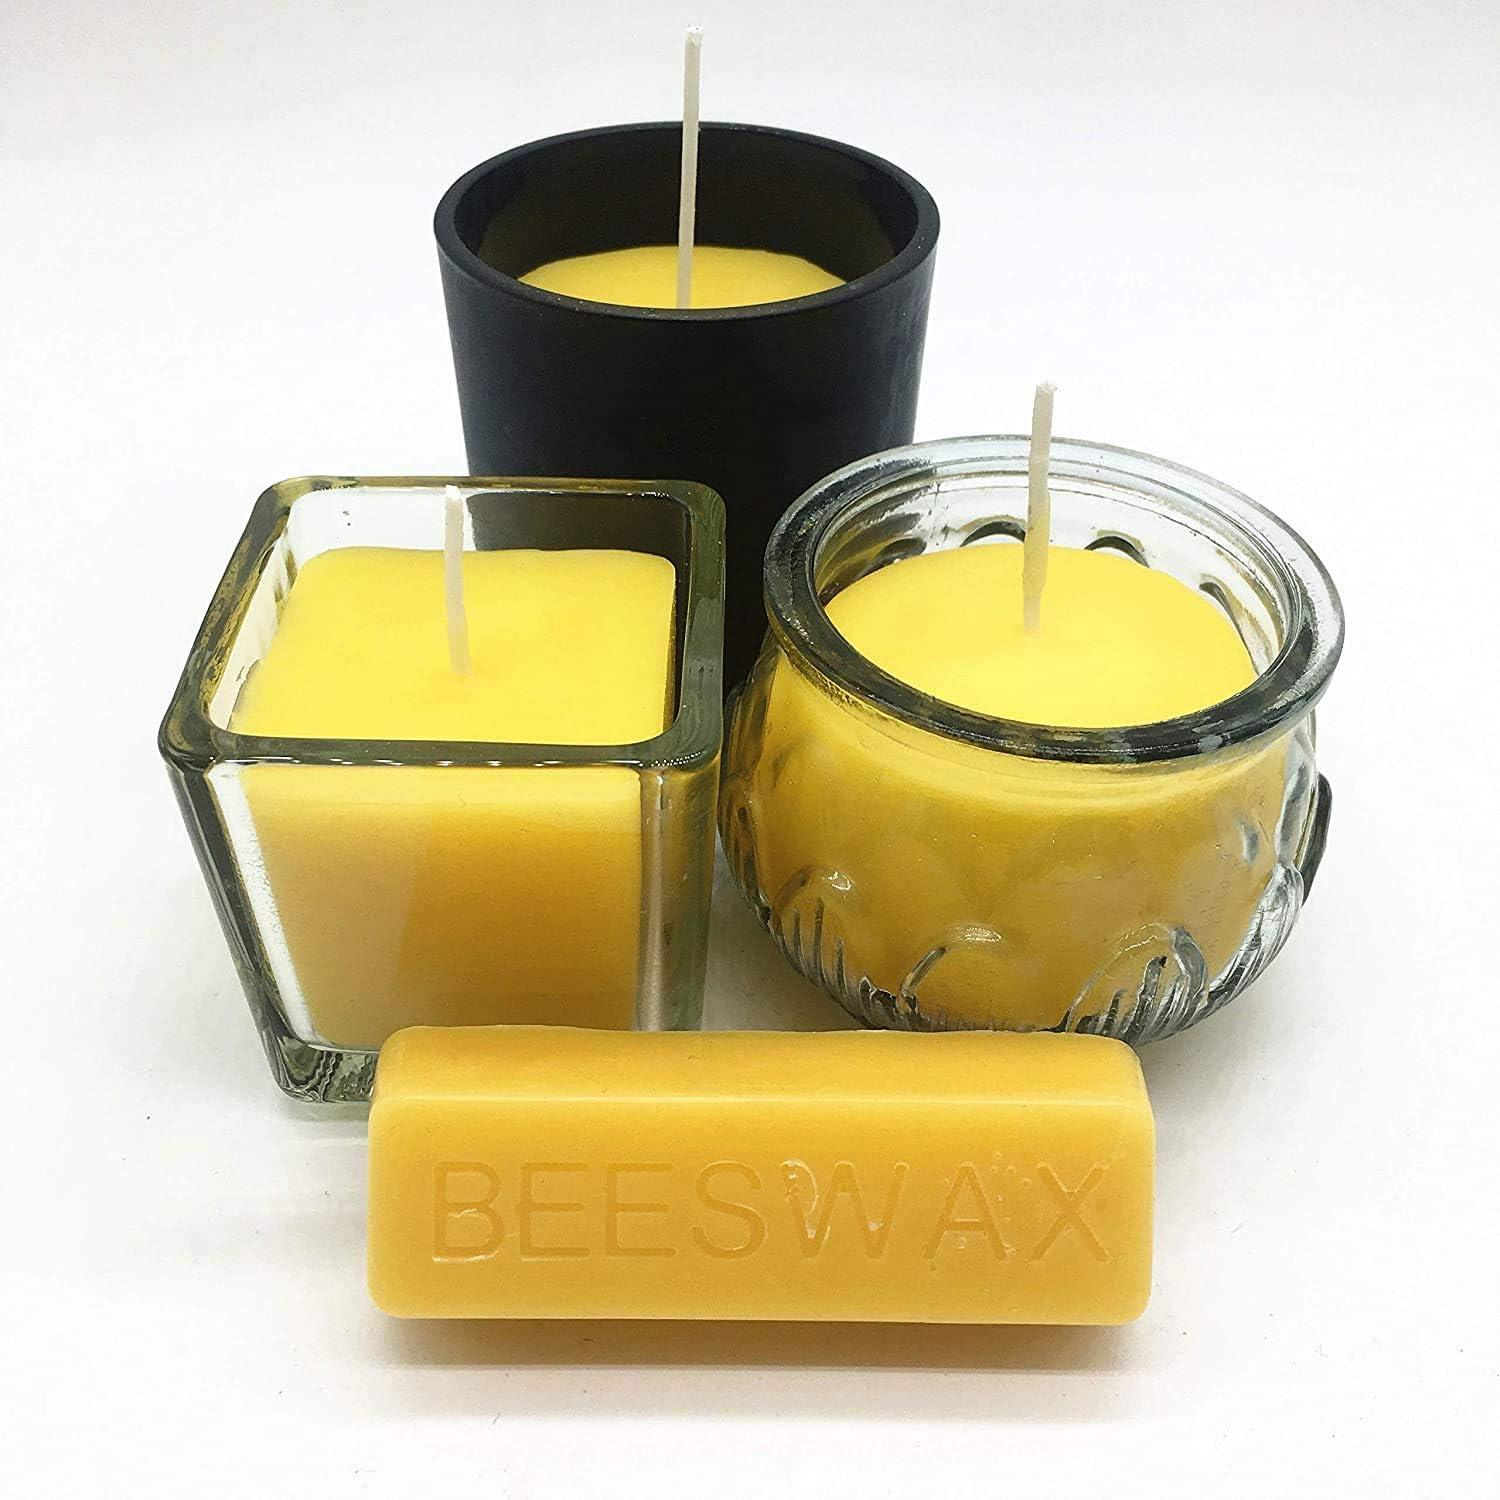  Beesworks Yellow Beeswax Pellets (1 lb)  100% Pure, Cosmetic  Grade, Triple-Filtered Beeswax for DIY Skin Care, Lip Balm, Lotion, and  Candle Making : Arts, Crafts & Sewing